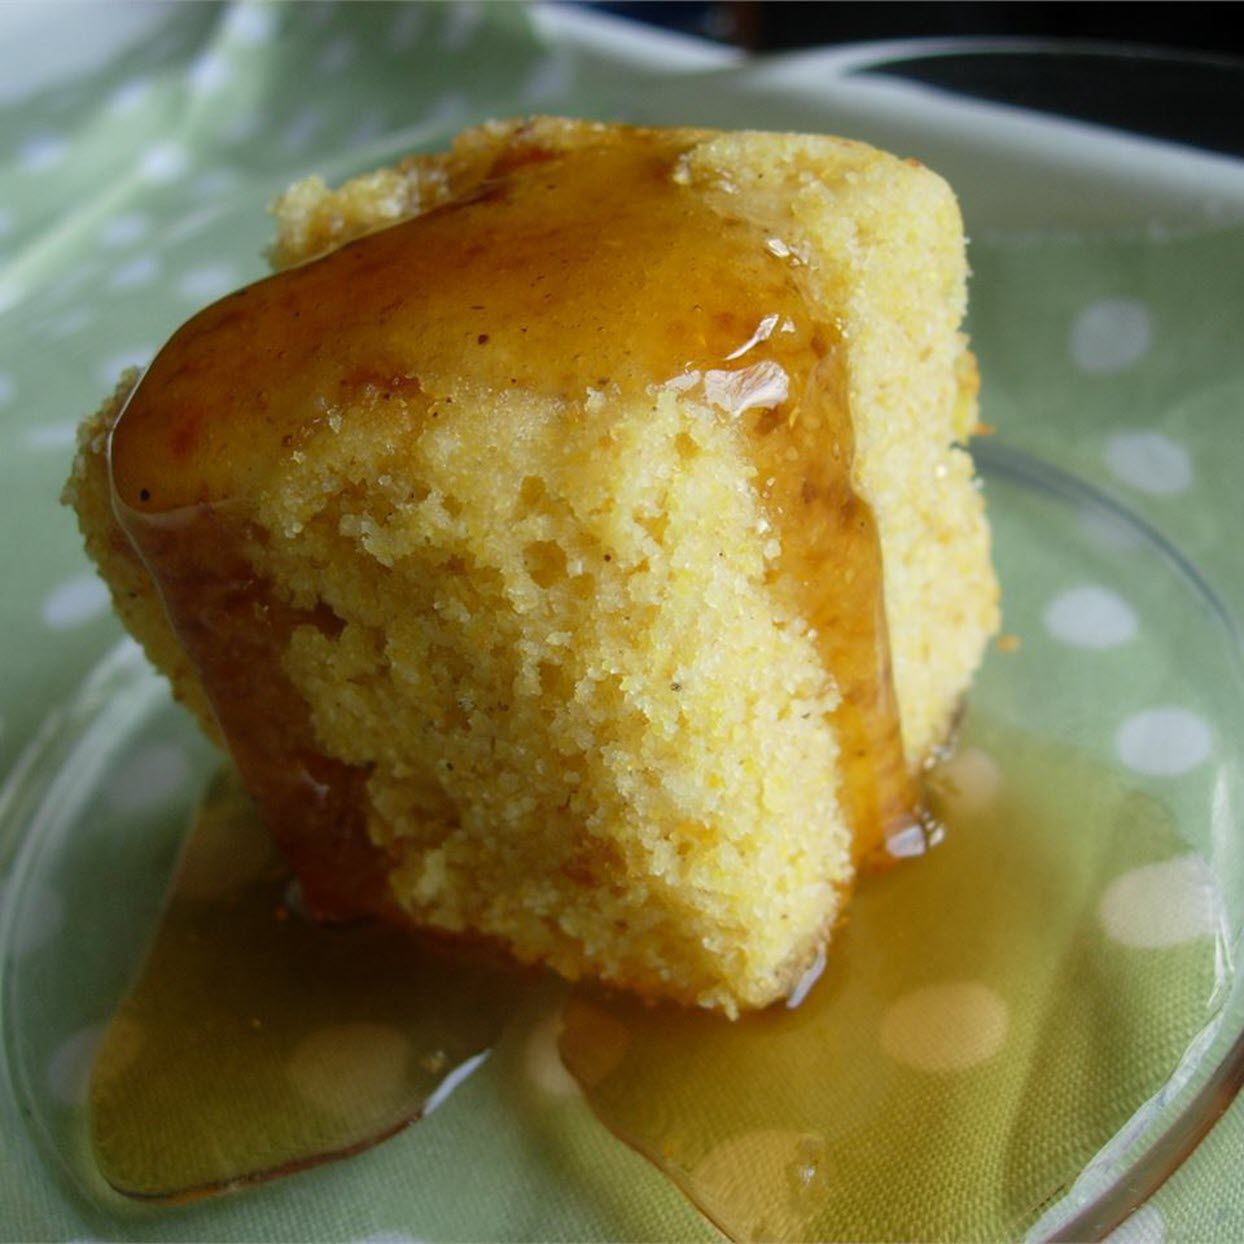 a thick square of cornbread with honey dripping down its sides on a green plate